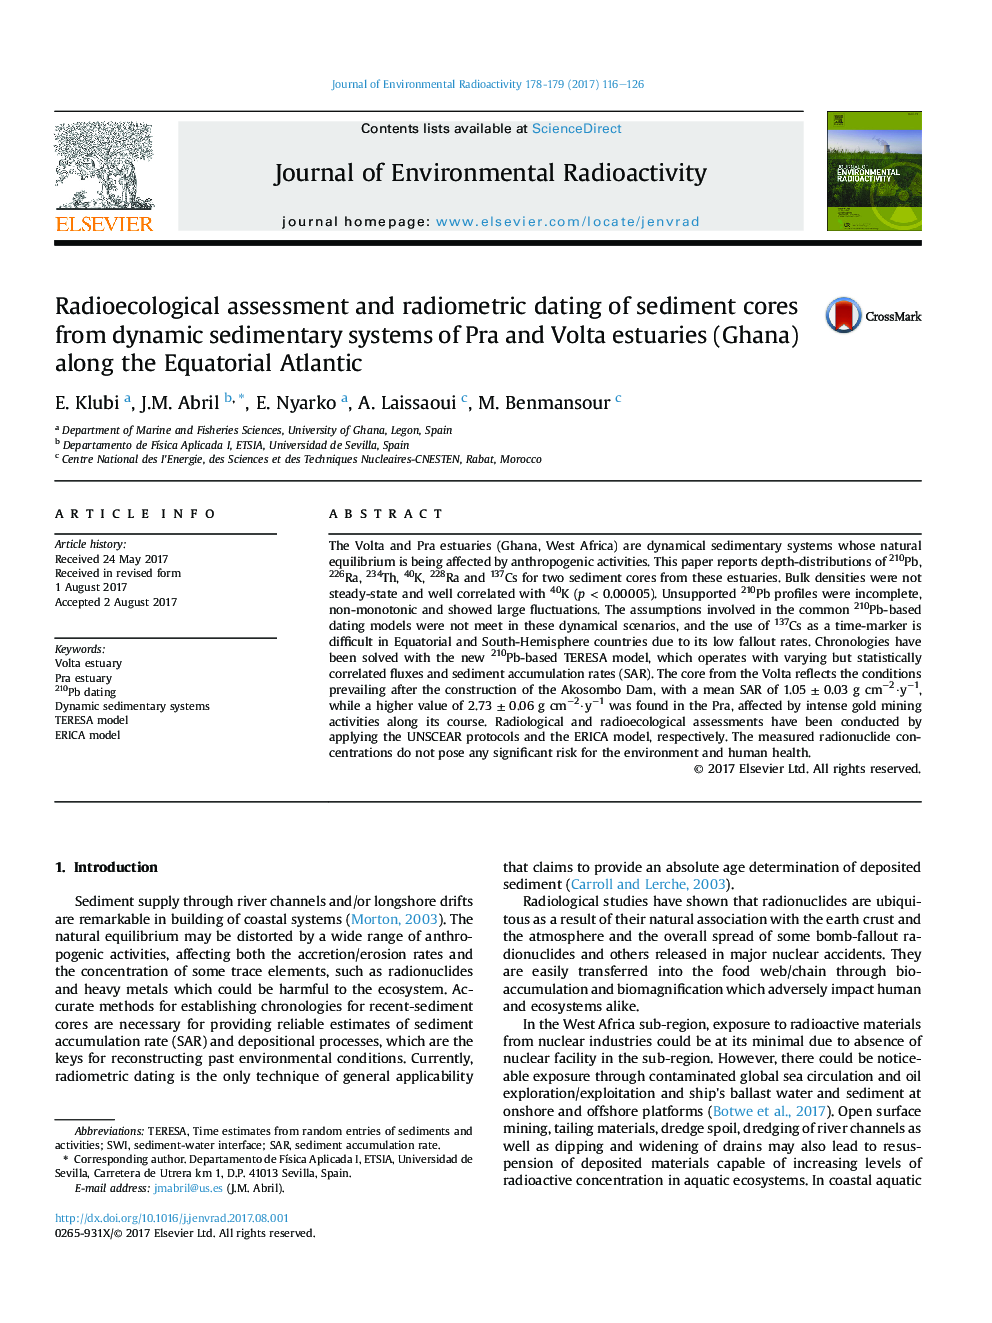 Radioecological assessment and radiometric dating of sediment cores from dynamic sedimentary systems of Pra and Volta estuaries (Ghana) along the Equatorial Atlantic